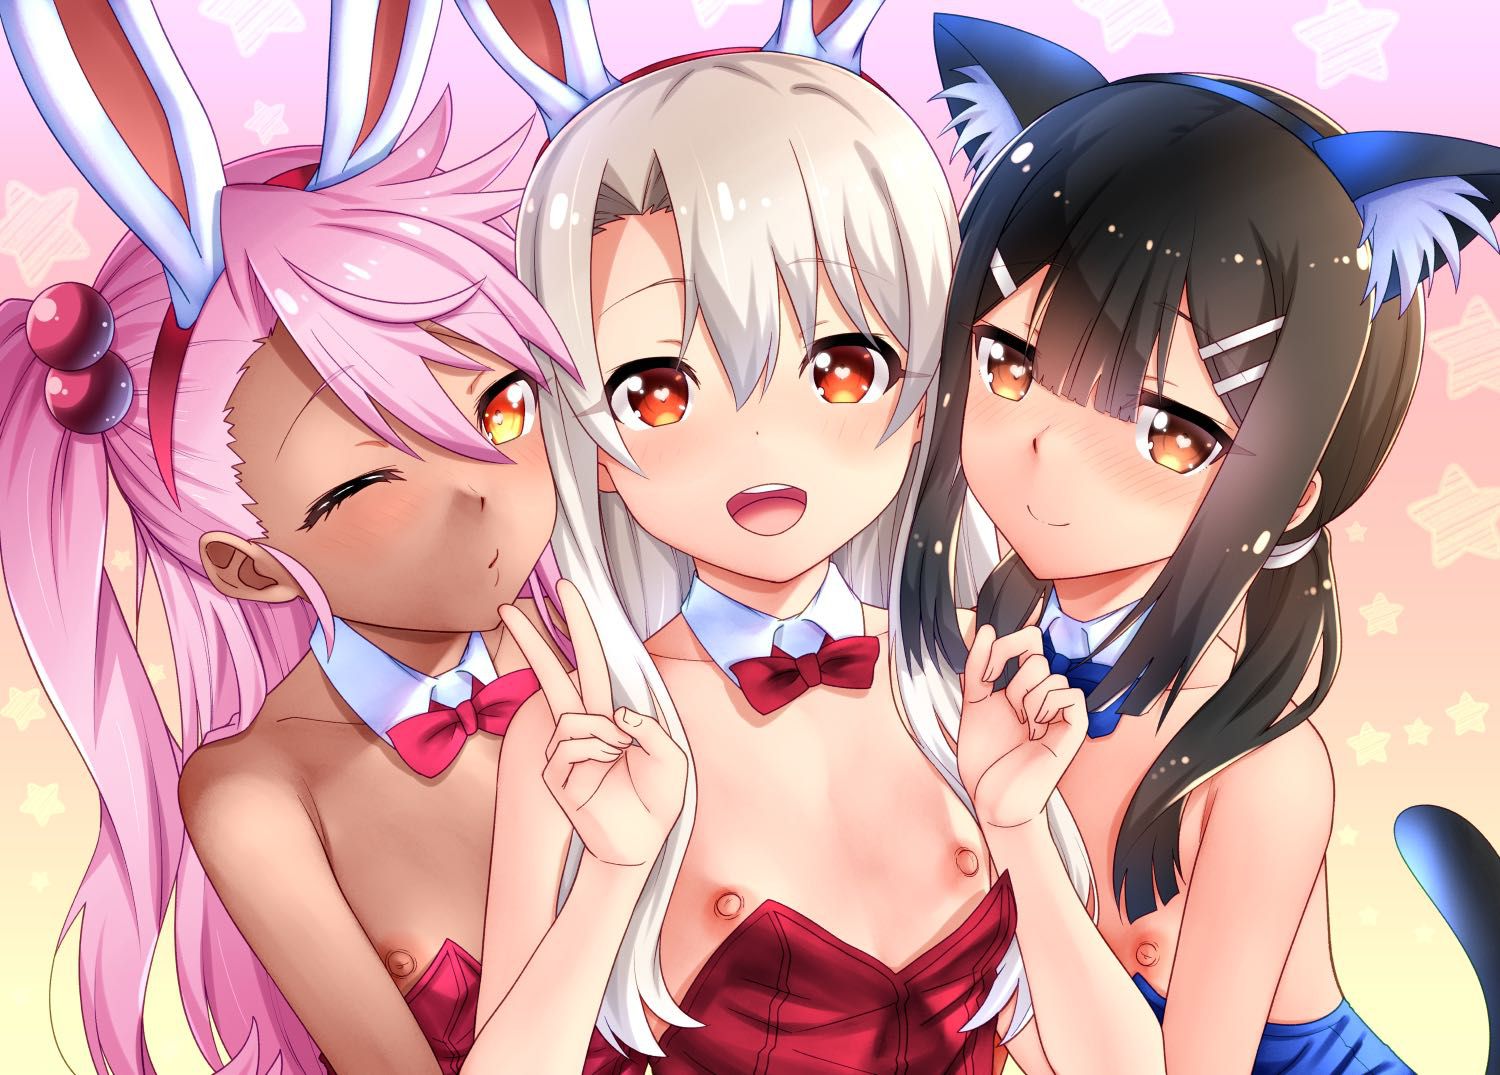 【Lori Bunny-chan】 Secondary erotic image that makes you want to see the moon with Usagi chan in the rabbit ear bunny girl of the secondary loli girl 24